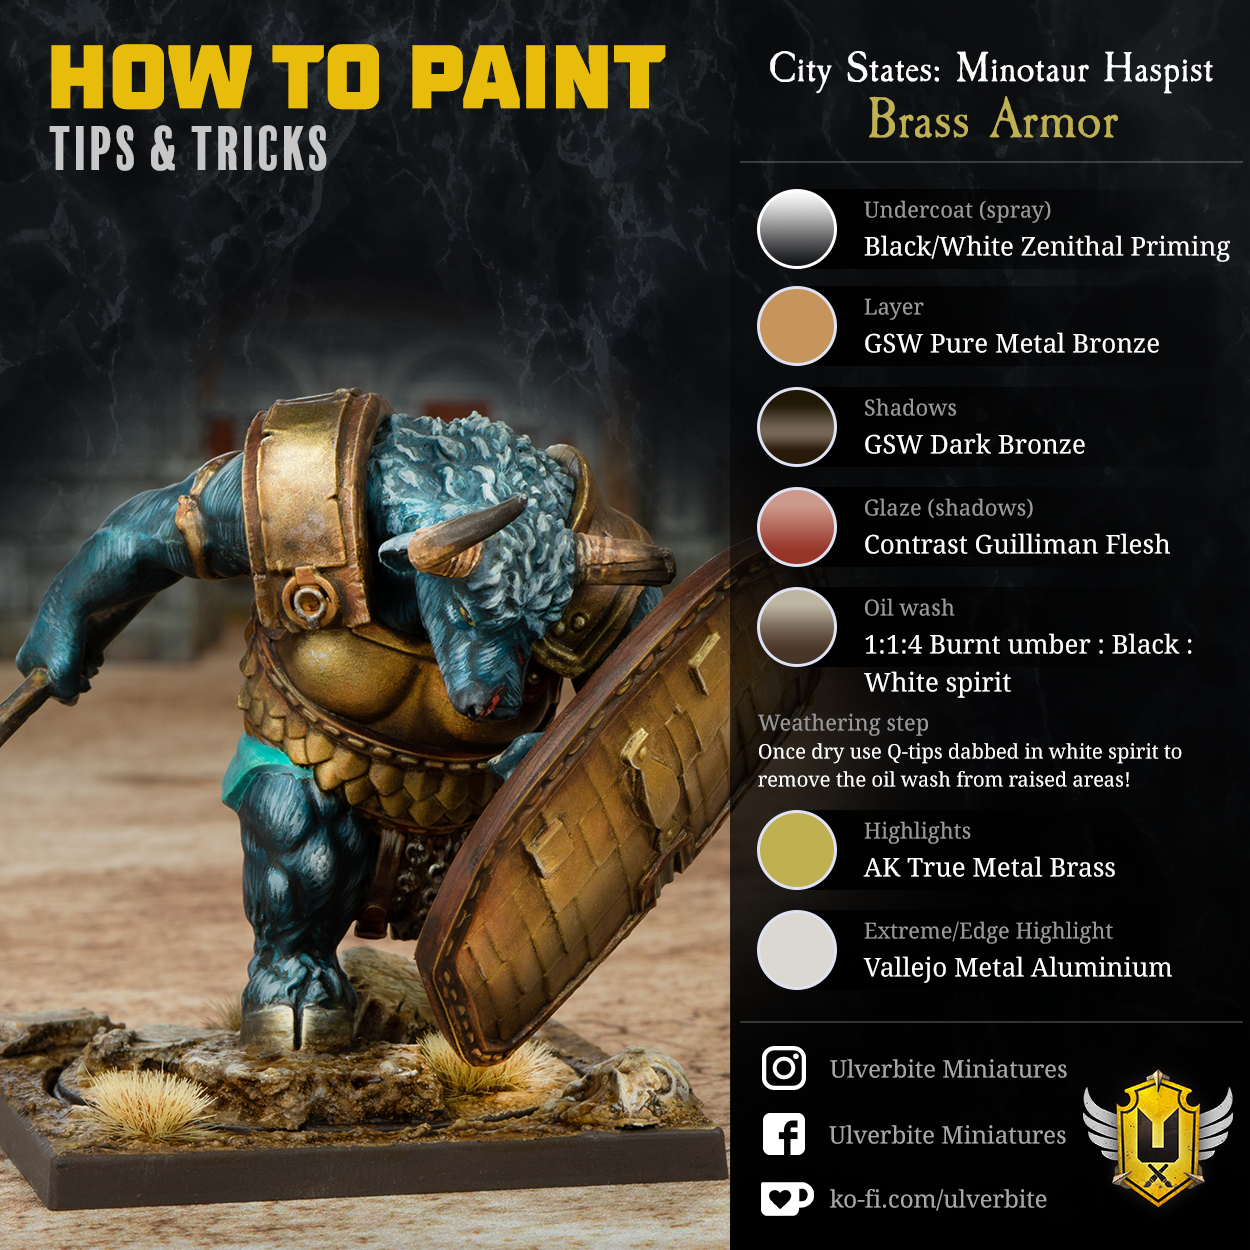 How to Paint Brass Armor — Ulverbite Miniatures, Commission Miniature  Painting Service, Painting Miniatures, Wargaming, Painting tutorials